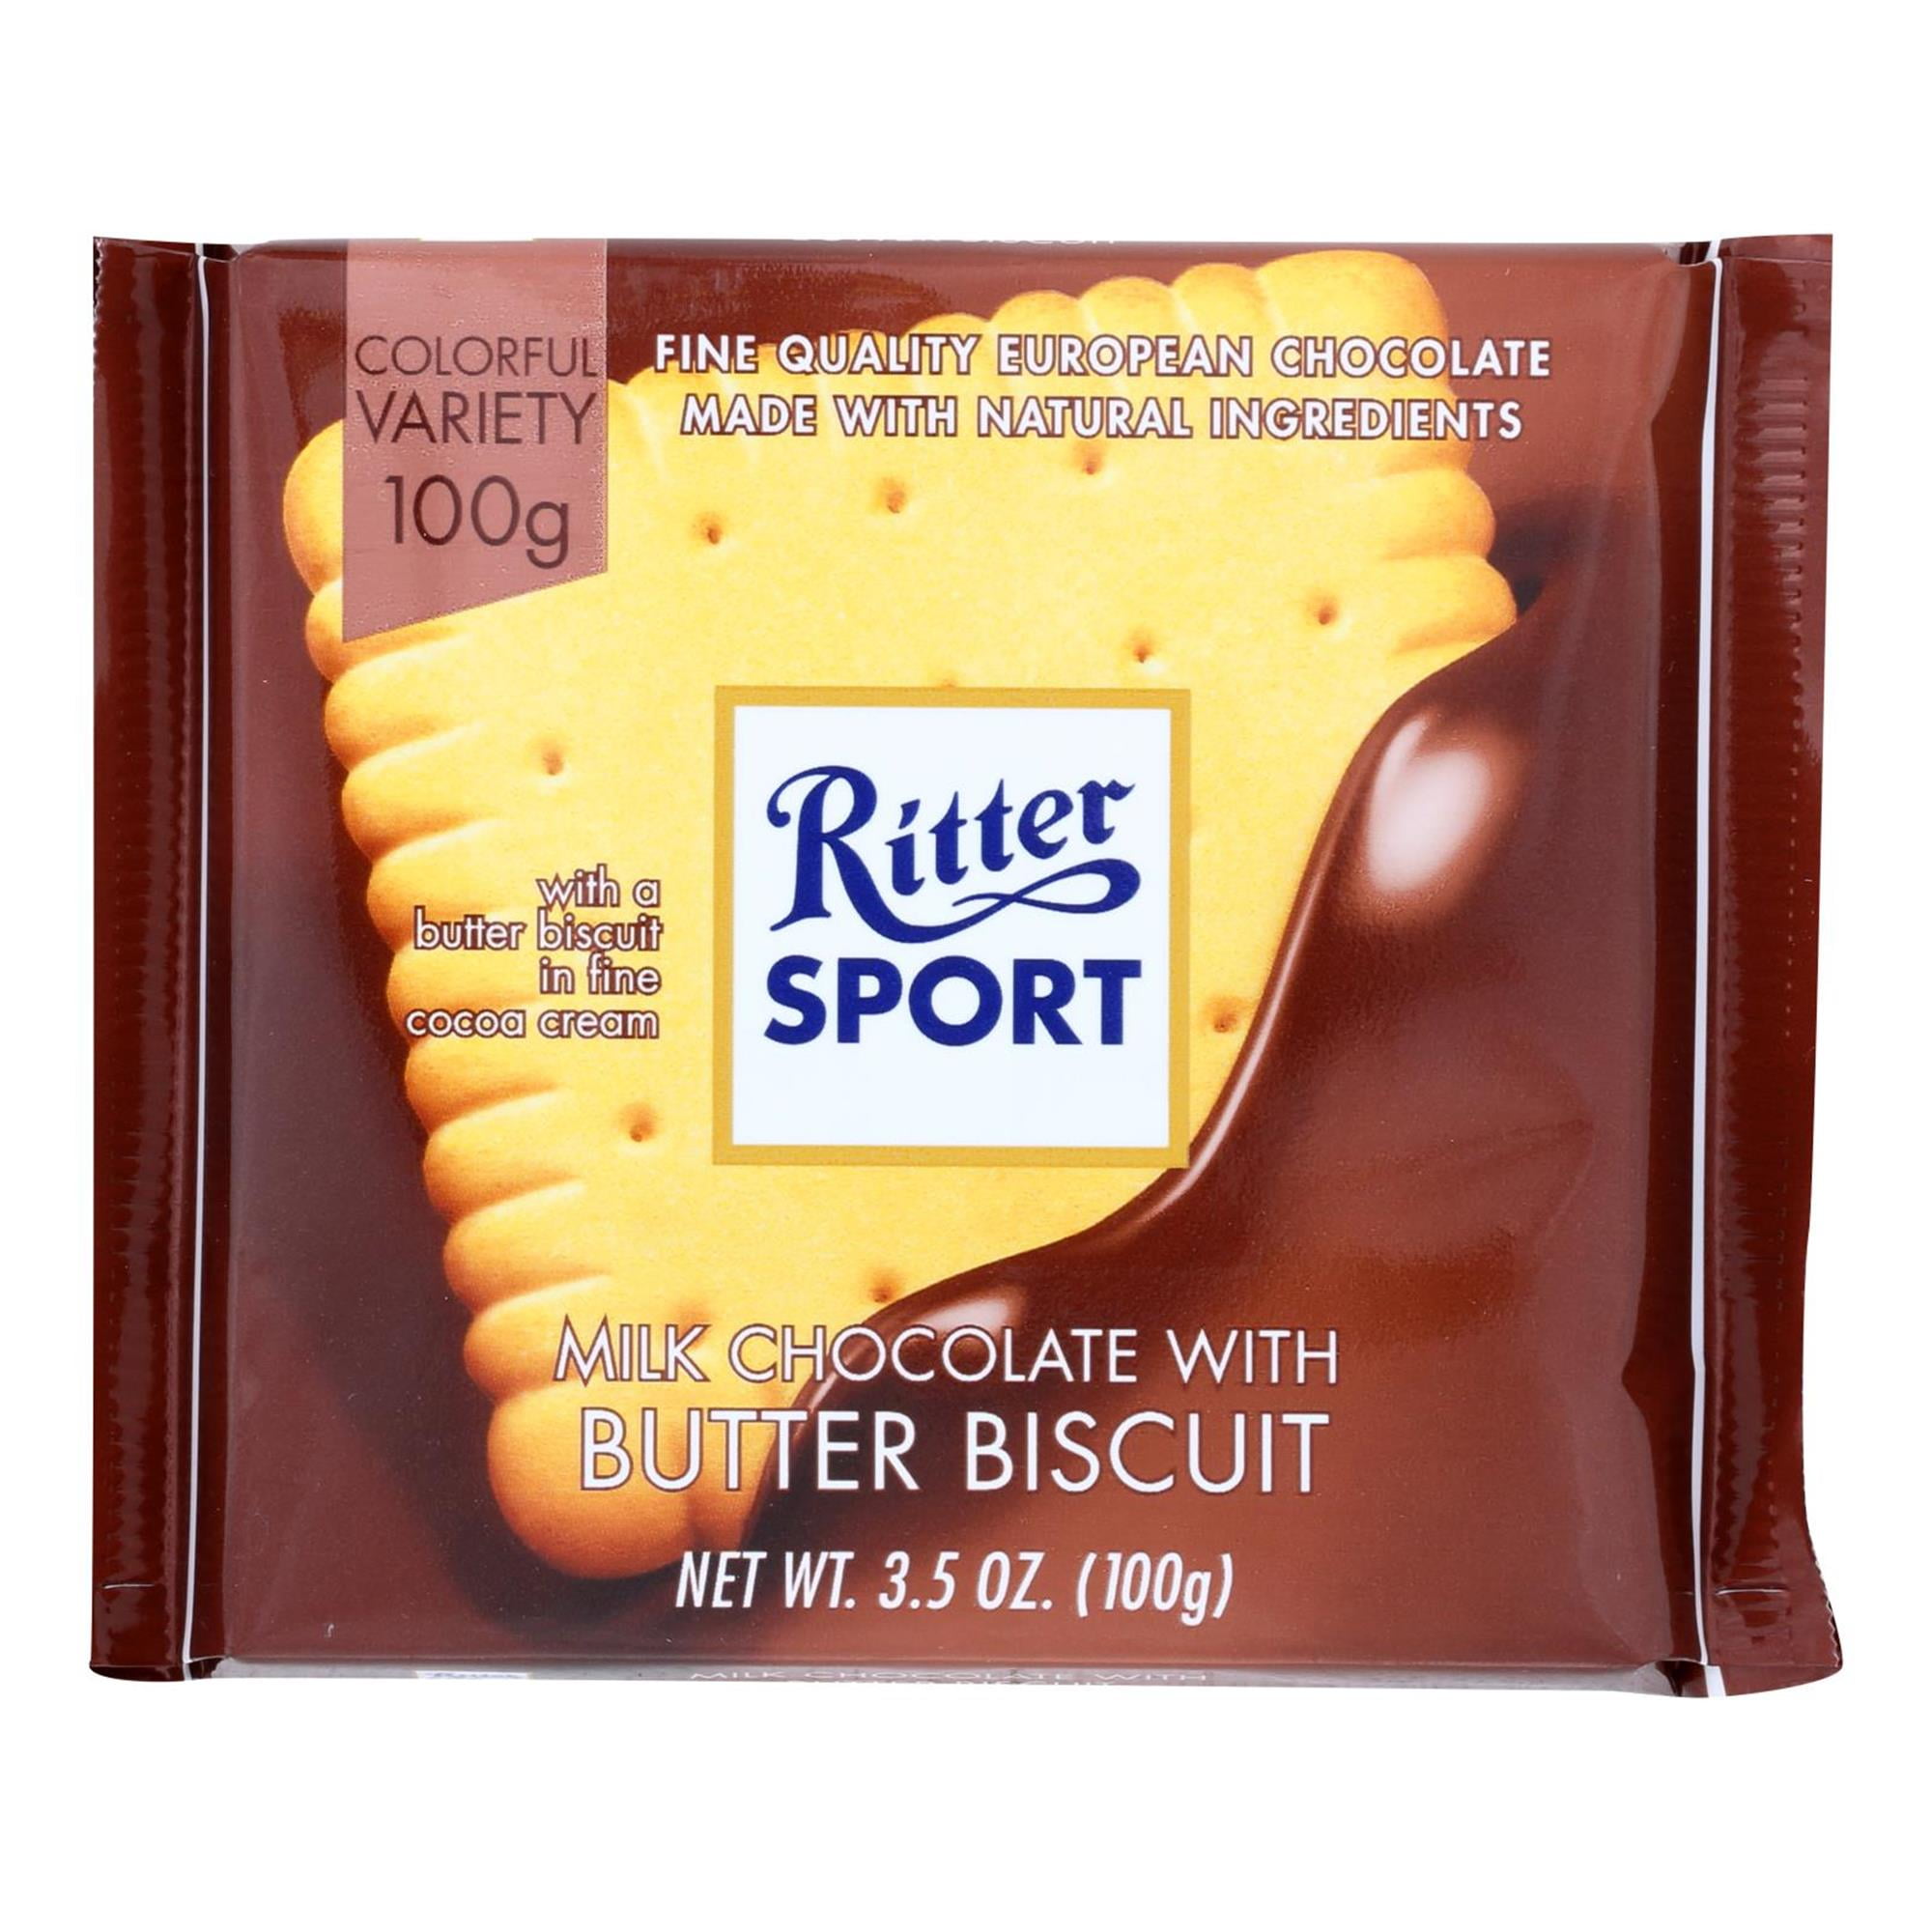 Ritter Sport Milk Chocolate with Butter Biscuit Candy Bar - 3.5oz